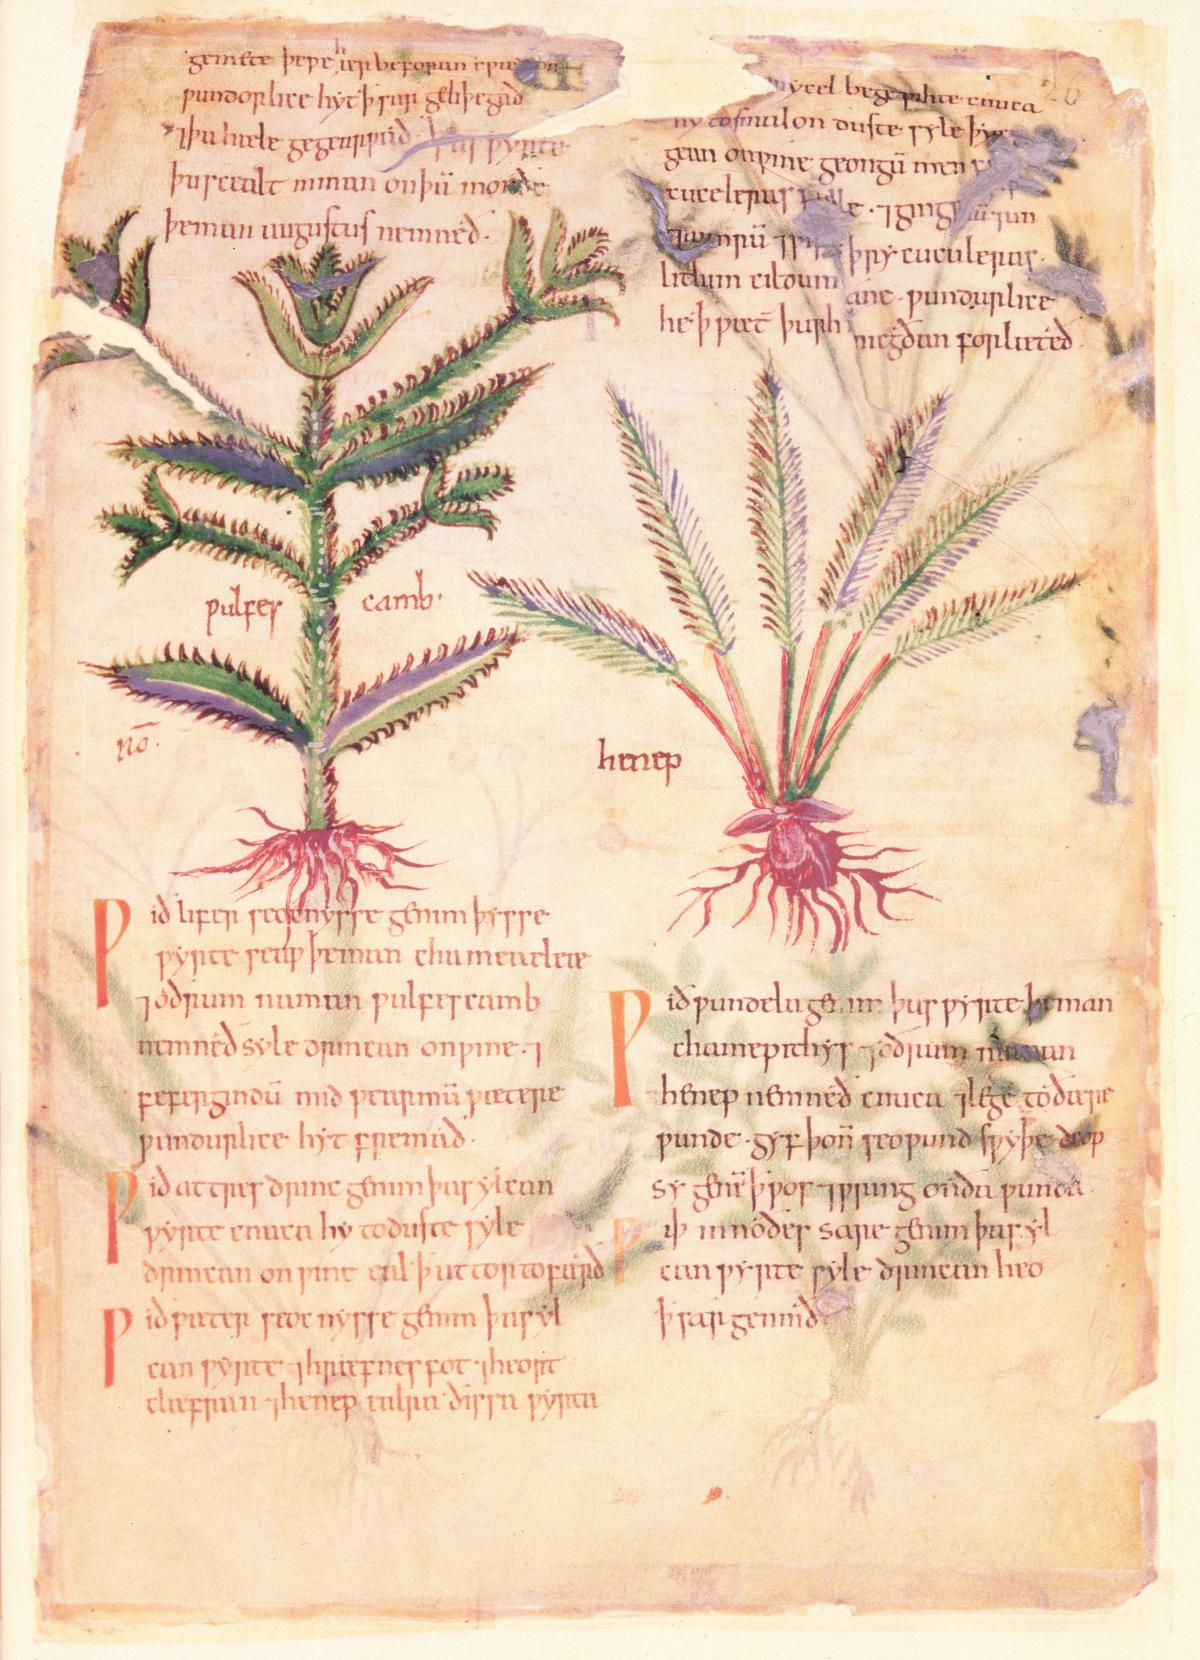 Delicate color drawings of two herbs, captioned with text in red ink